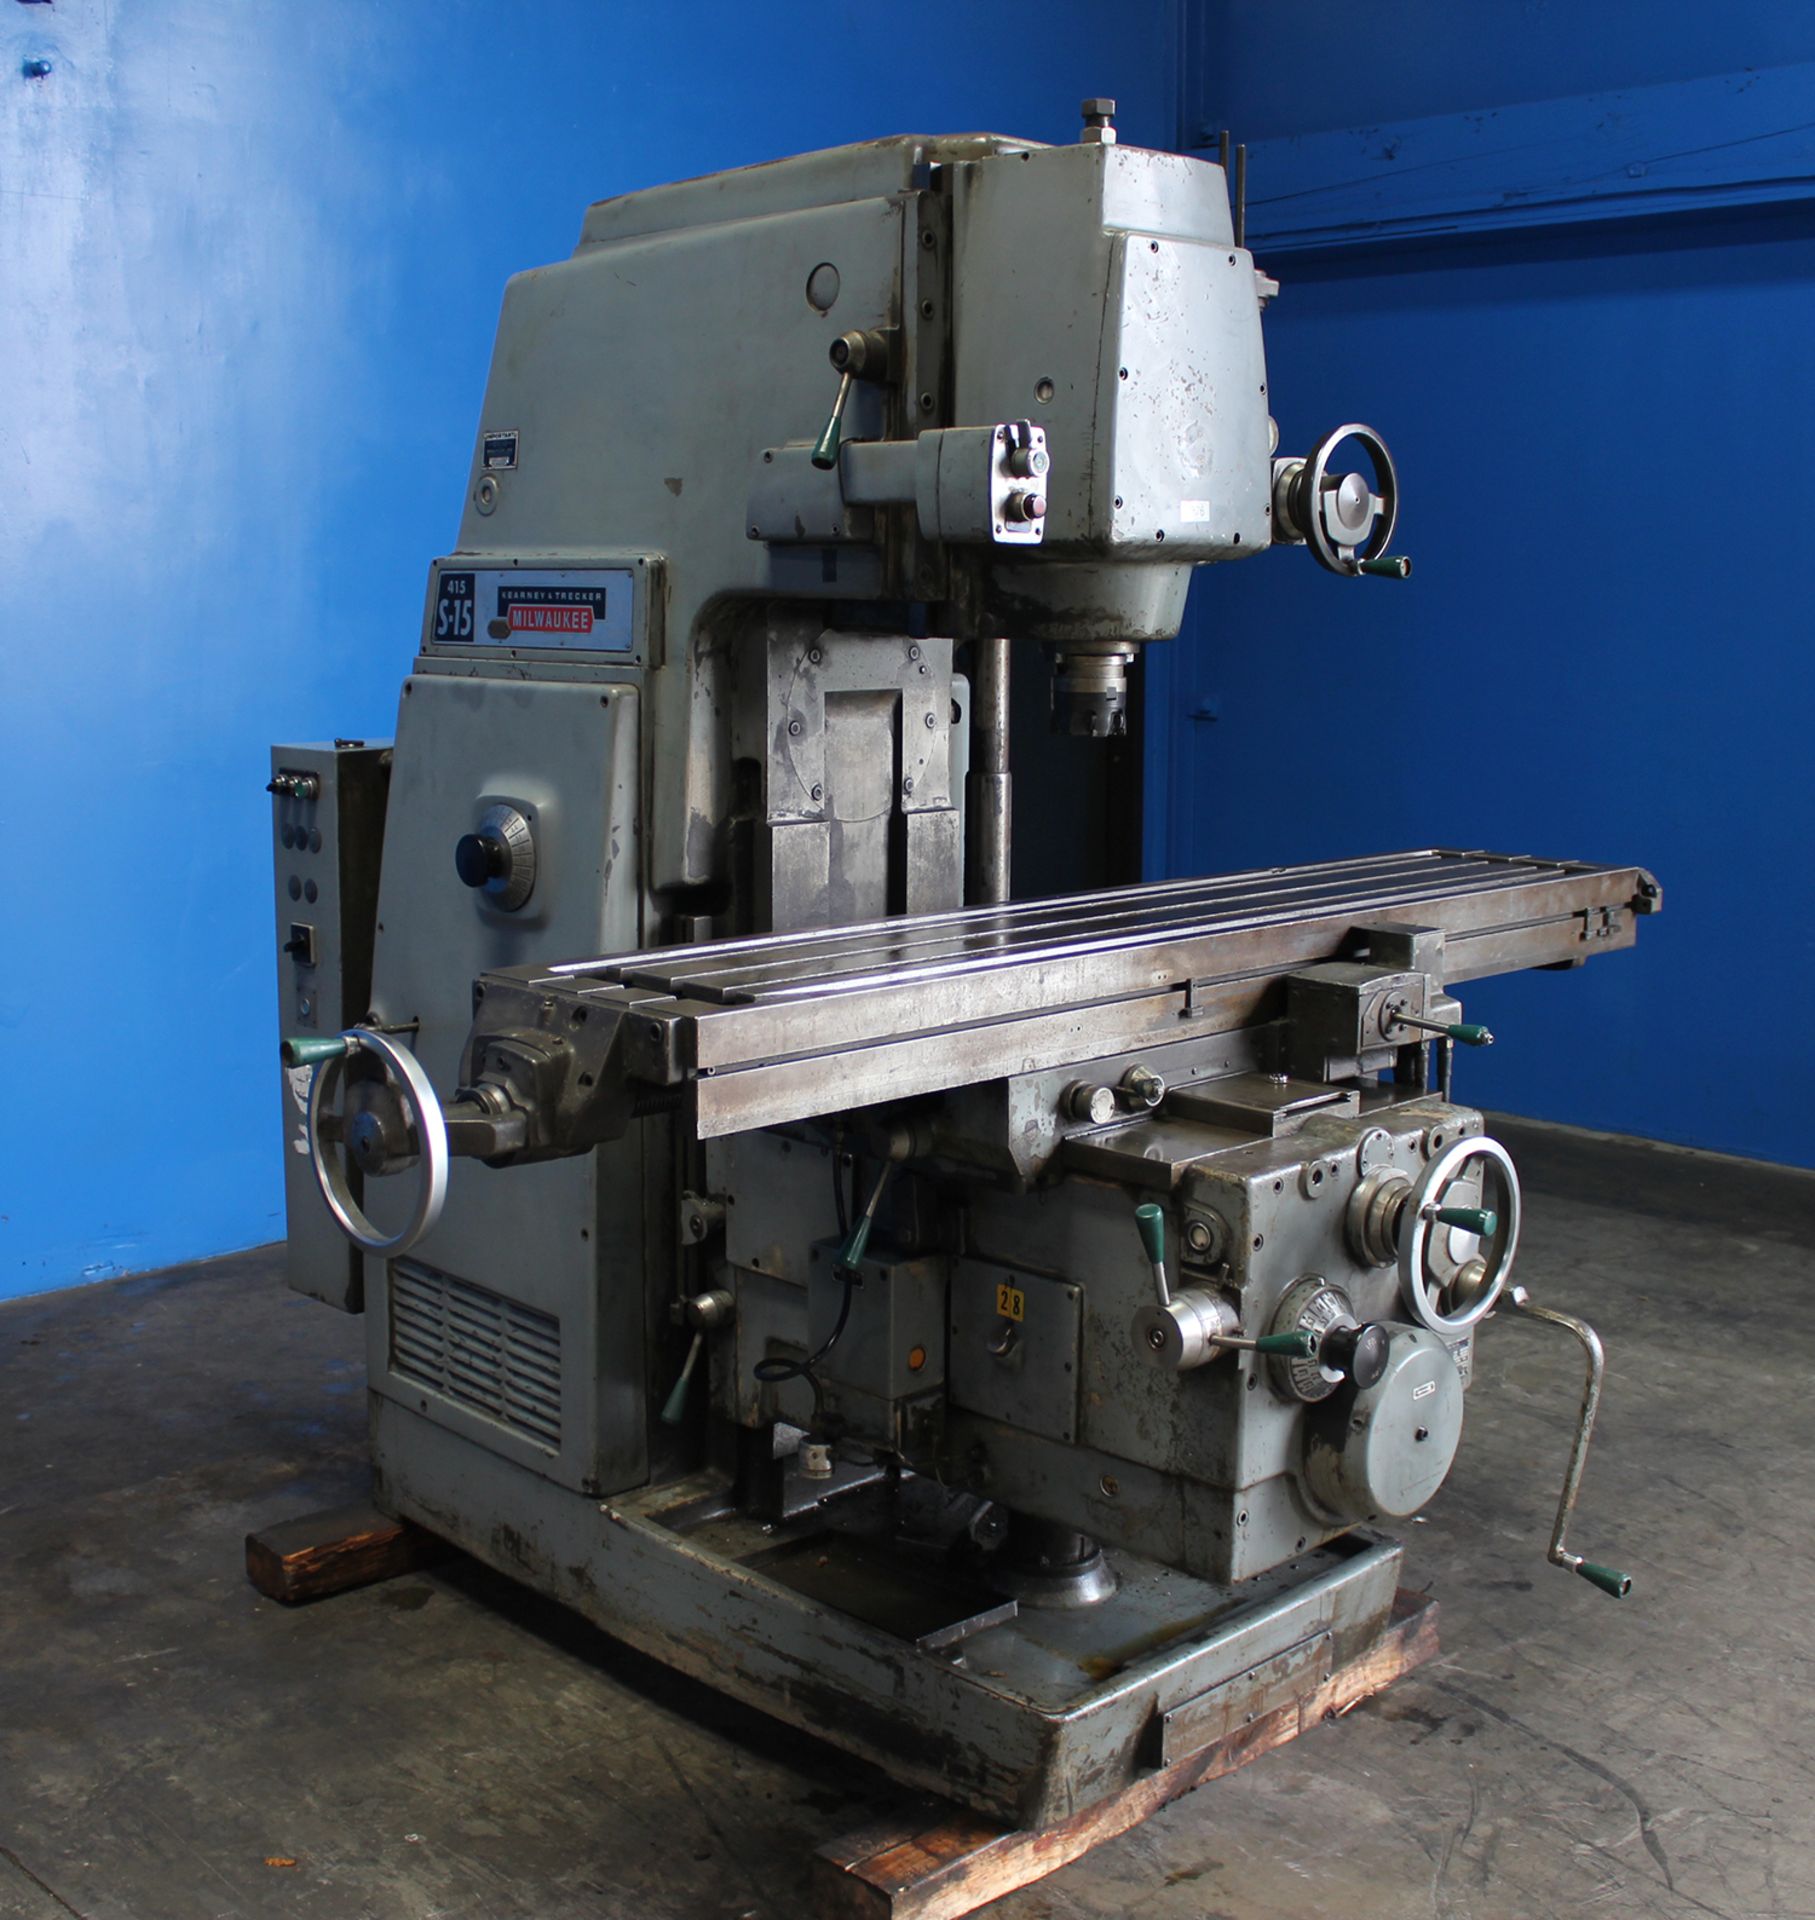 15" x 76" Table Kearney Trecker K&T 415 S-15 Vertical Milling Machine - Located In: Huntington Park, - Image 3 of 8